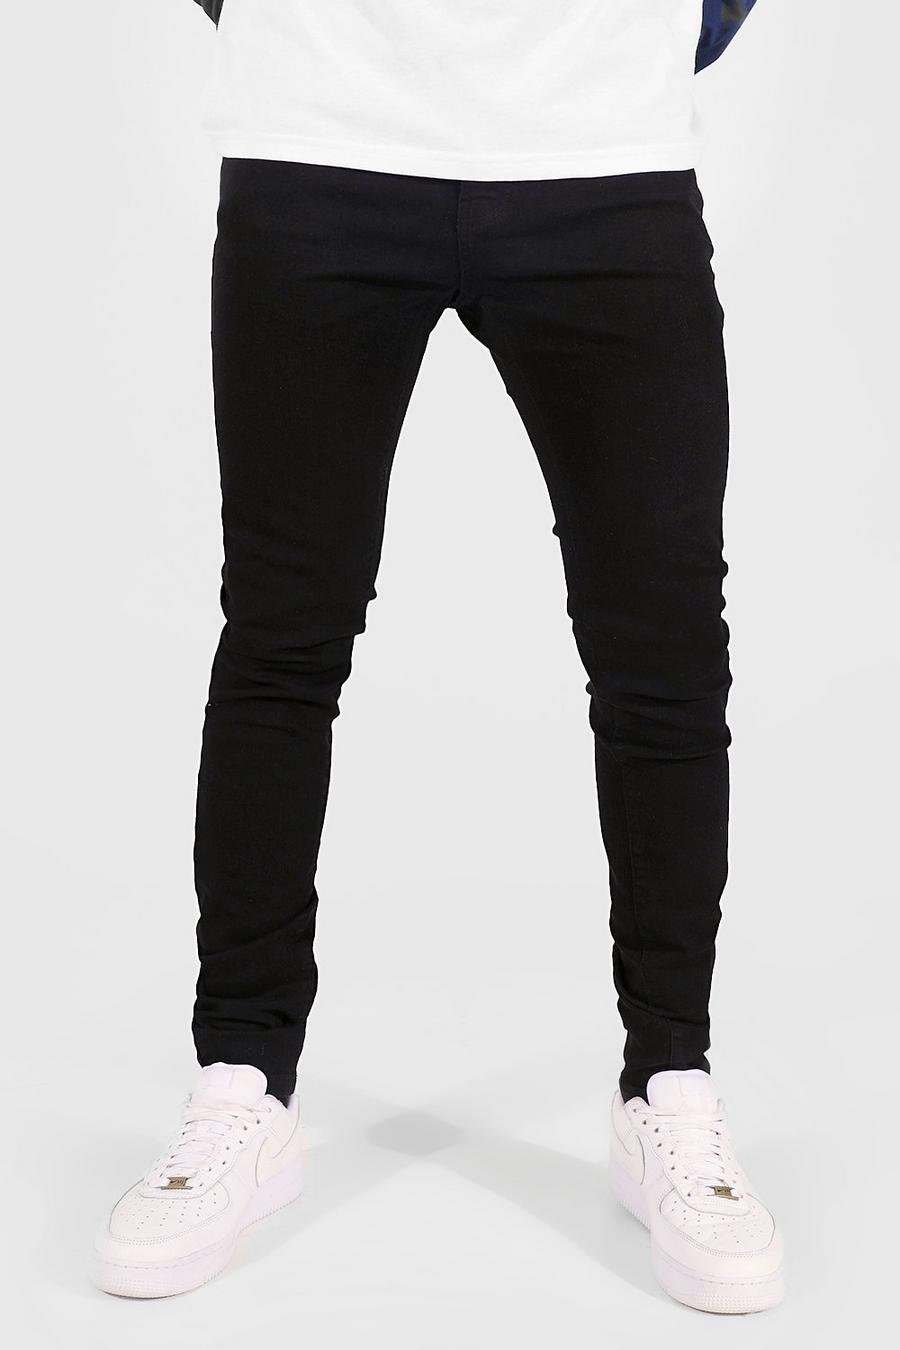 Jeans Tall Skinny Fit, Black negro image number 1